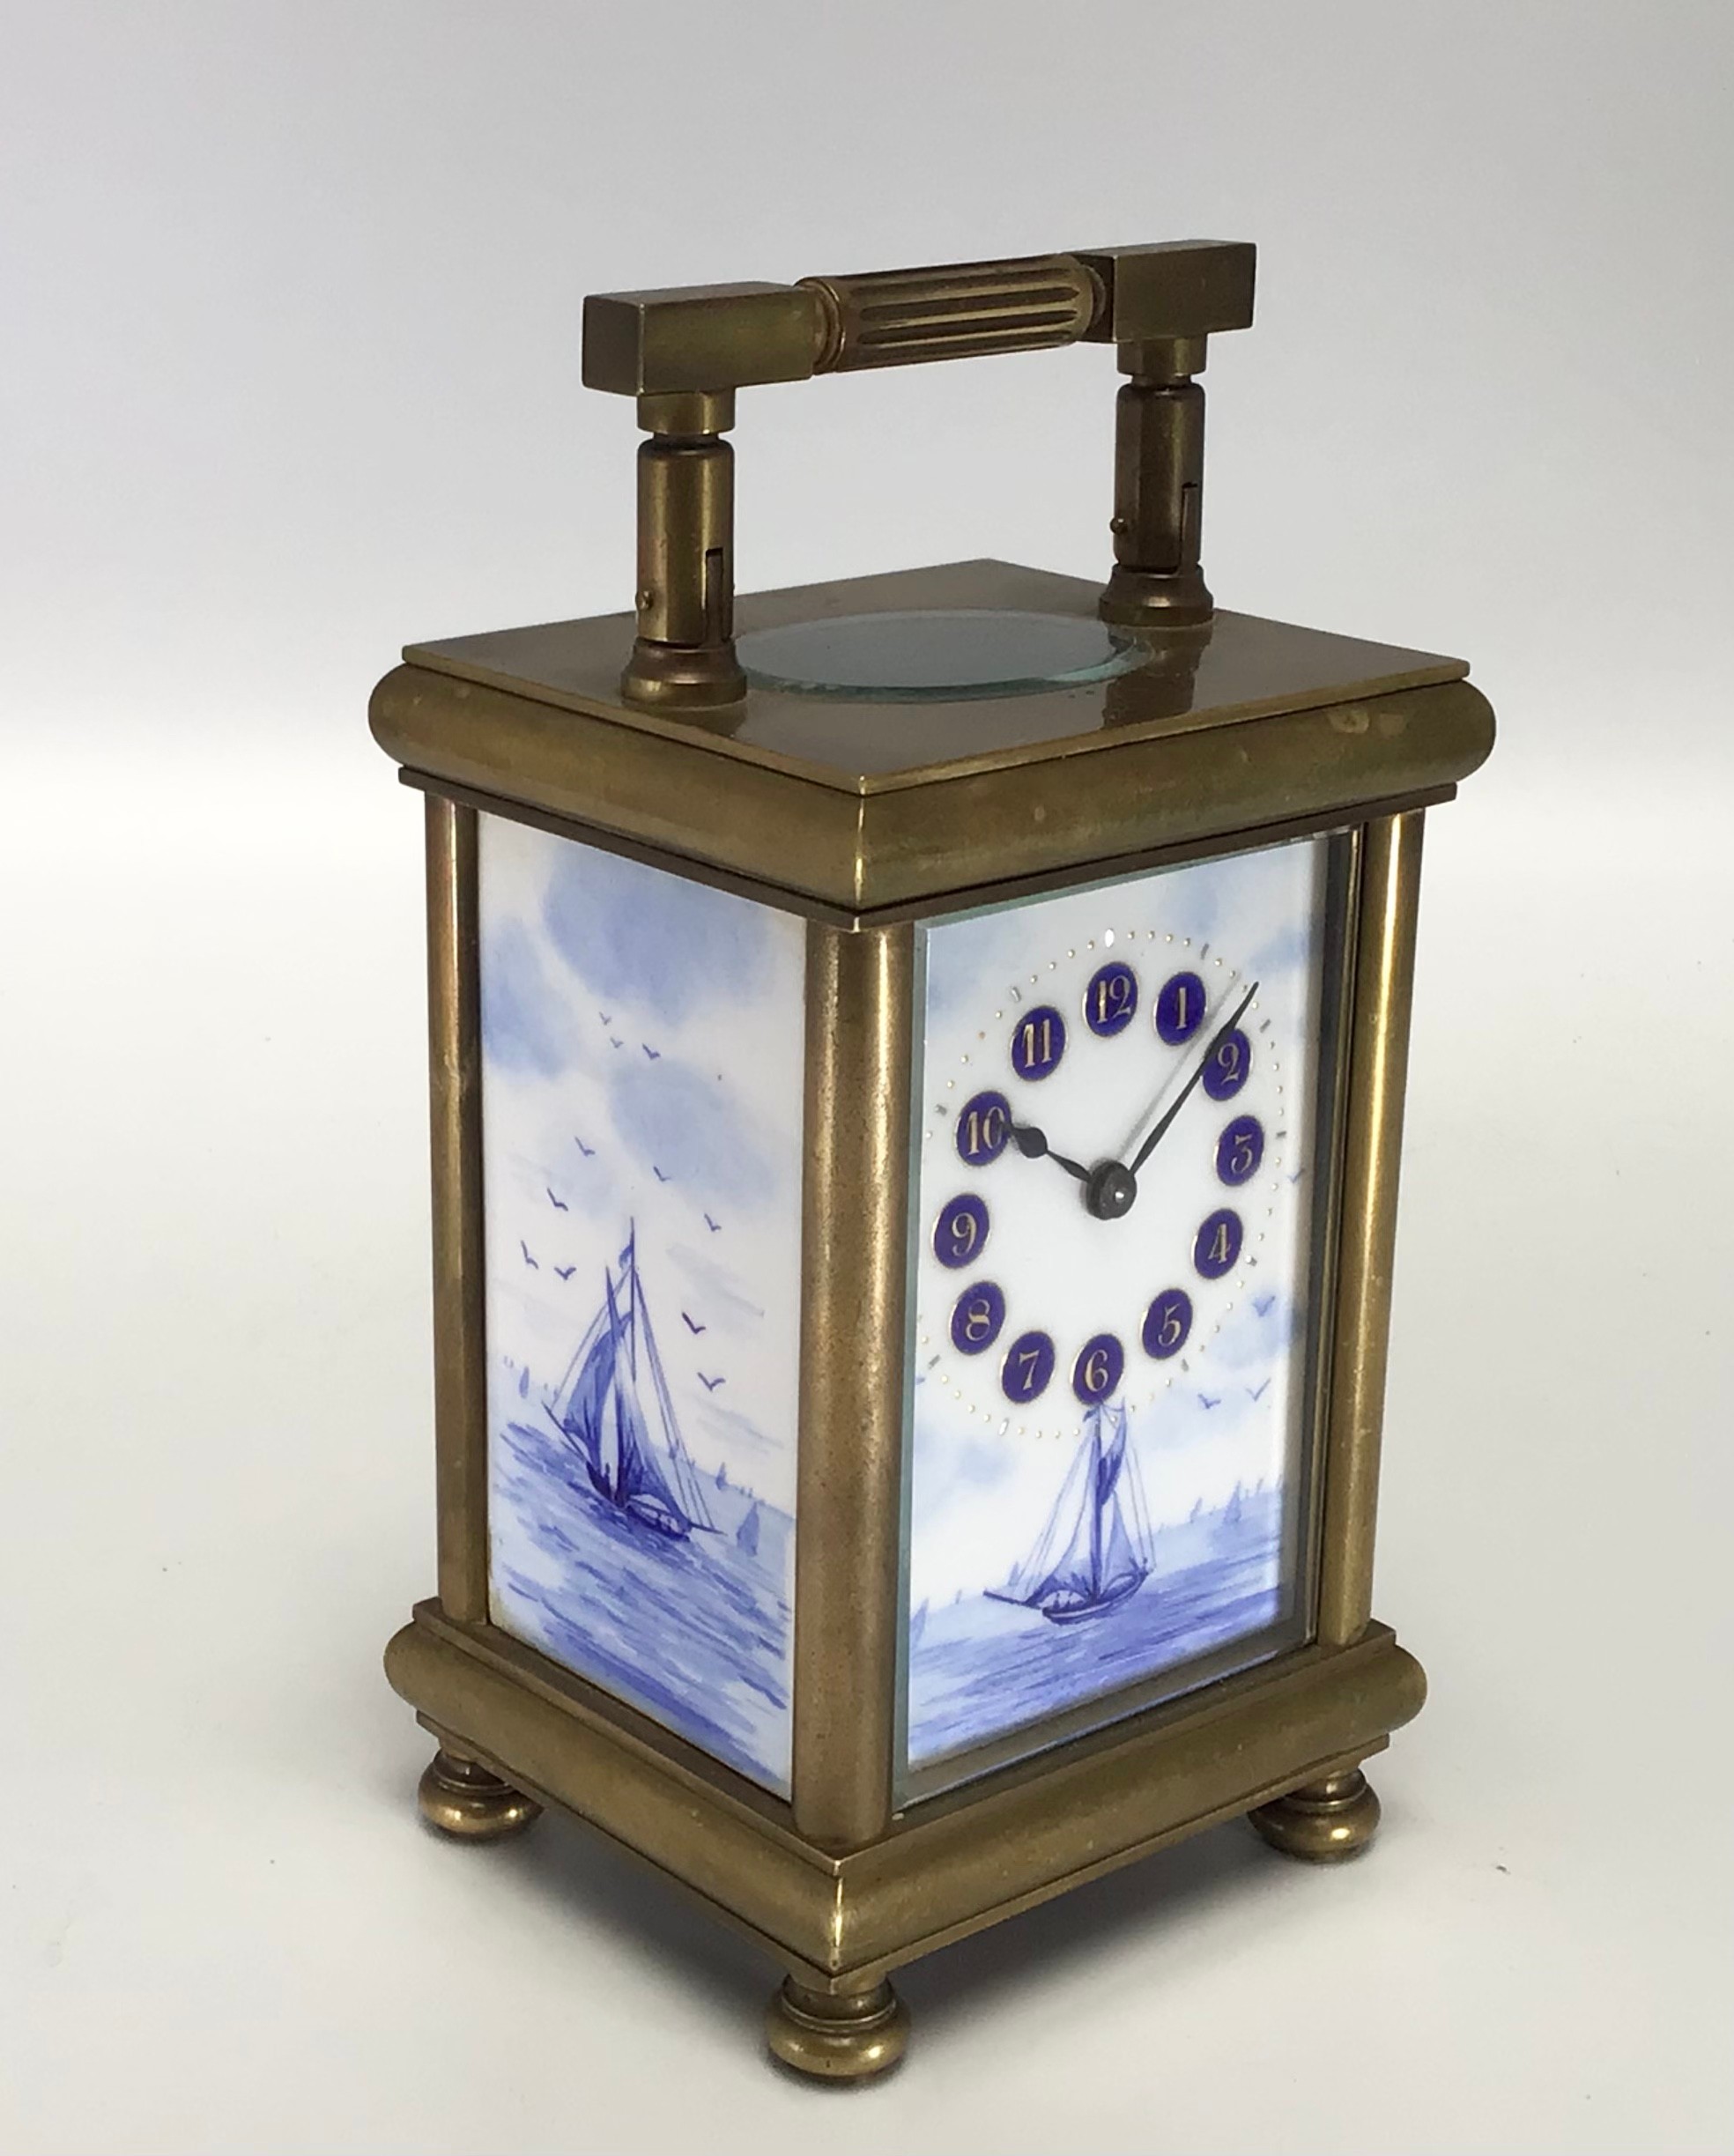 A Swiss brass cased carriage clock with blue and white porcelain panelled sides and dial panel, - Image 6 of 8